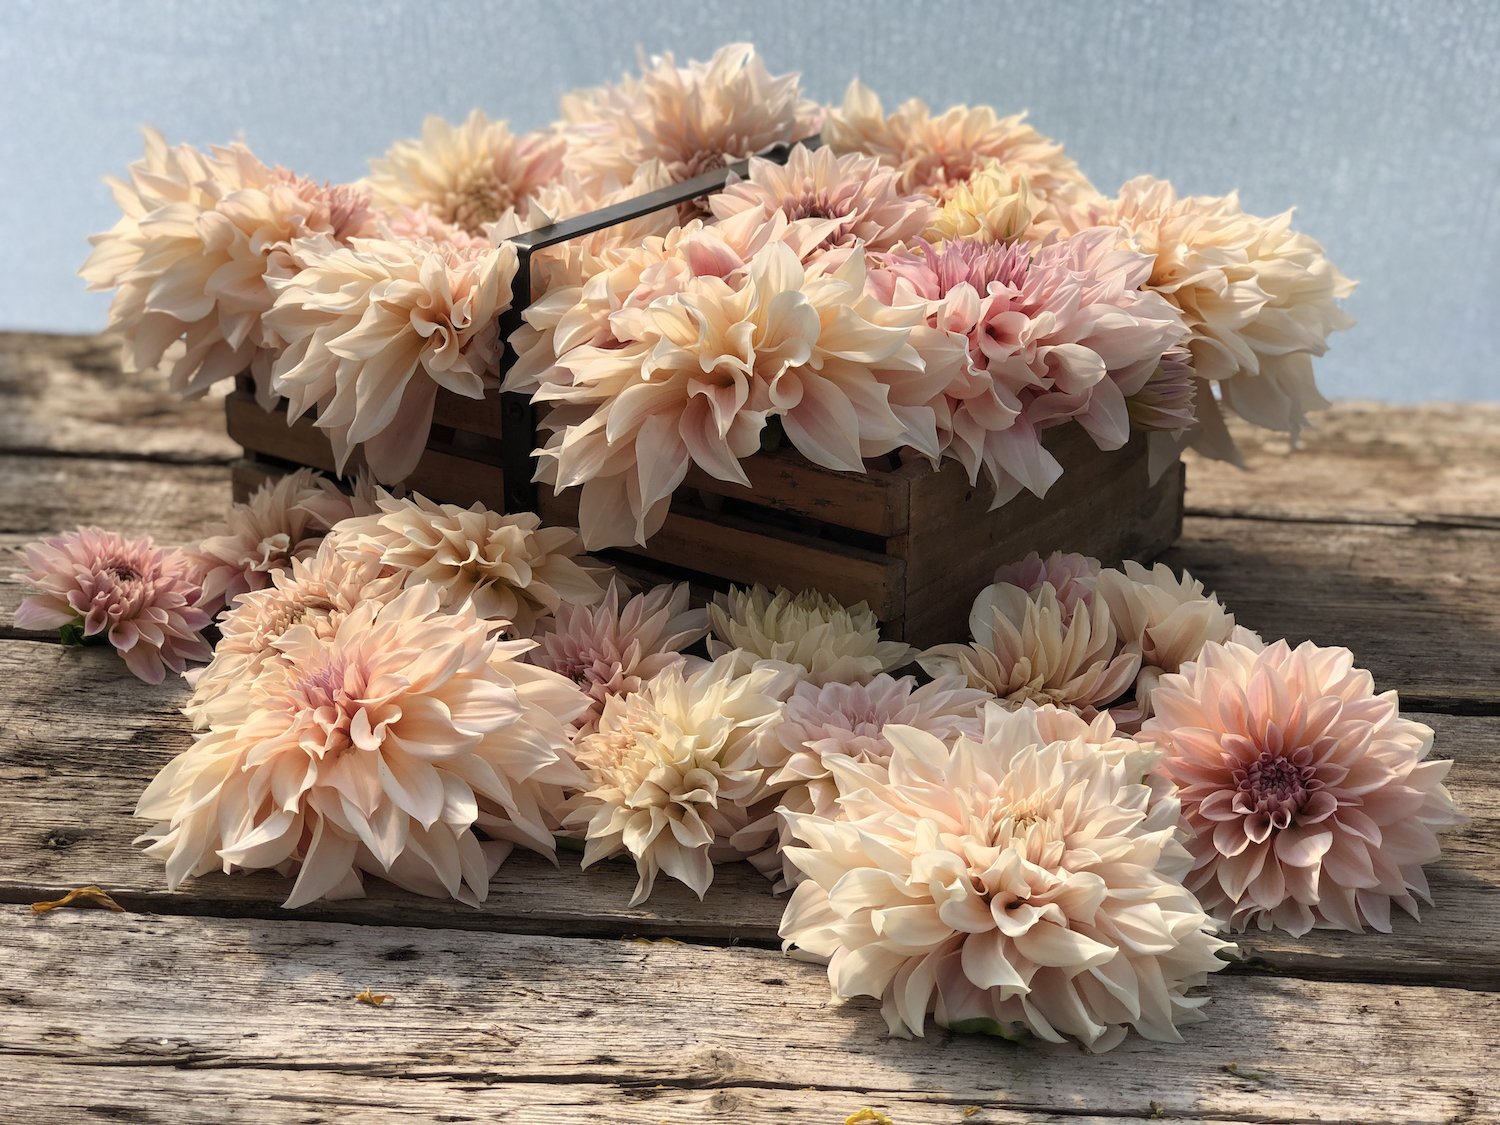 Masses of cafe au lait dahlias in wooden box homegrown in the cotswolds 